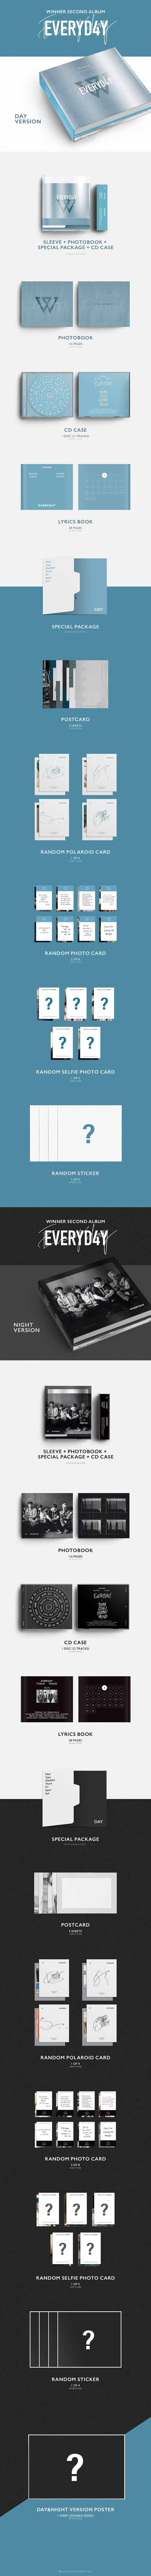 1 CD
1 Sleeve
1 Photo Book (116 pages)
1 Lyrics Book (28 pages)
5 Postcards
1 Polaroidcard
2 Photo Cards
1 Selfie Photo Ca...